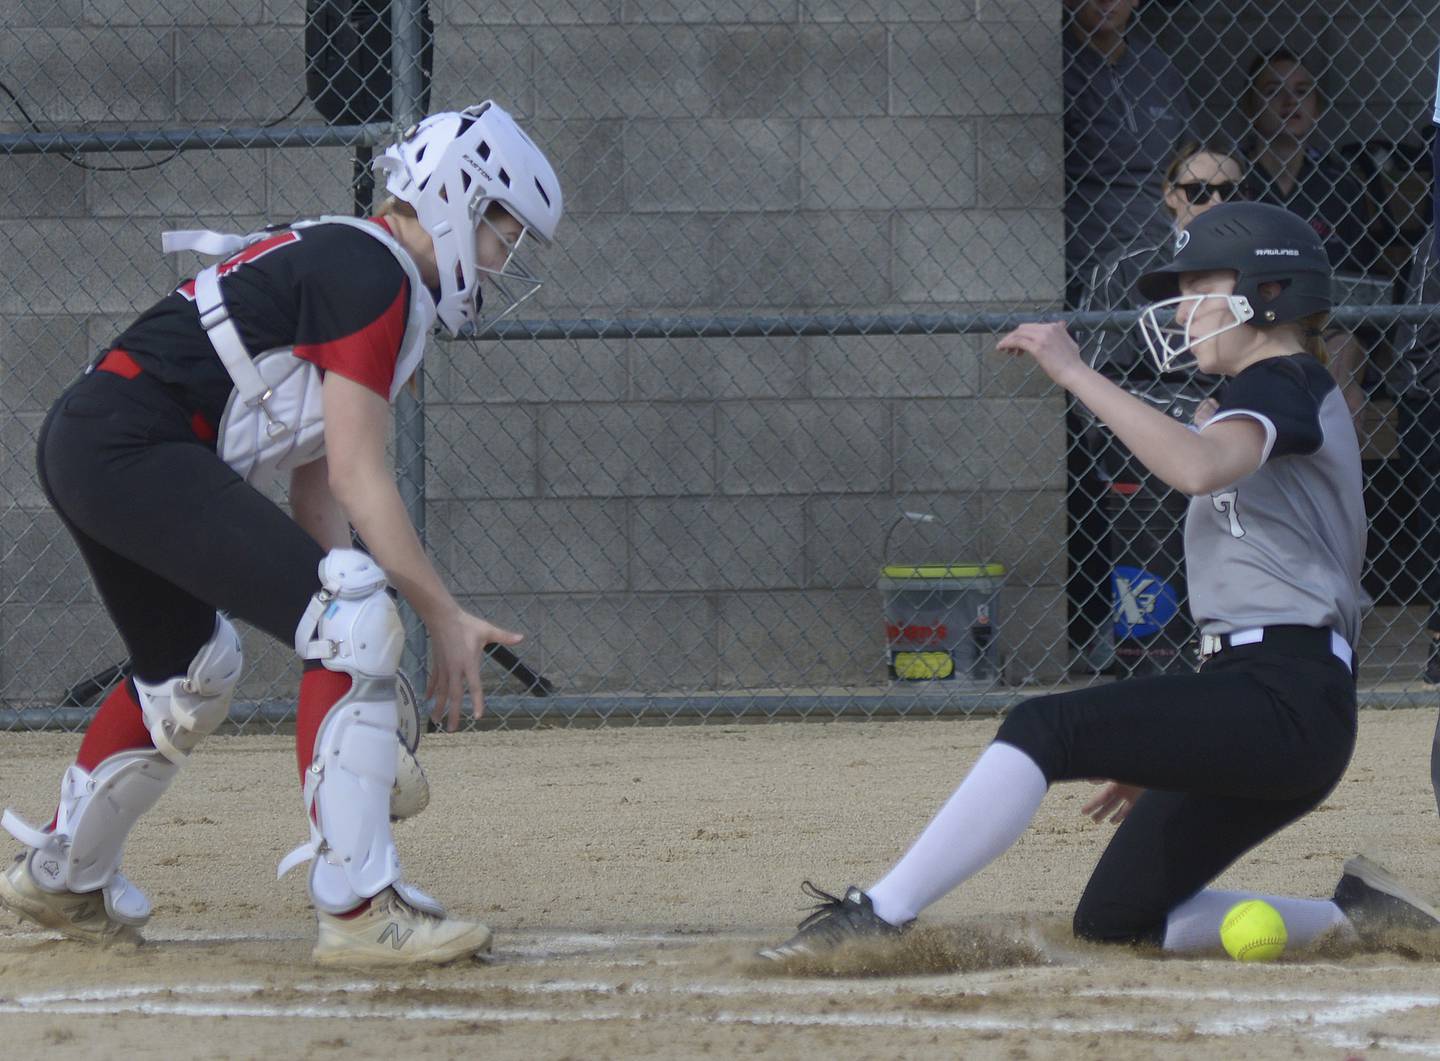 Woodland’s Taylor Heidenreich beats the throw to home to score the second run as Hall catcher Caroline Morris waits to tag in the 2nd inning Tuesday at Woodland.